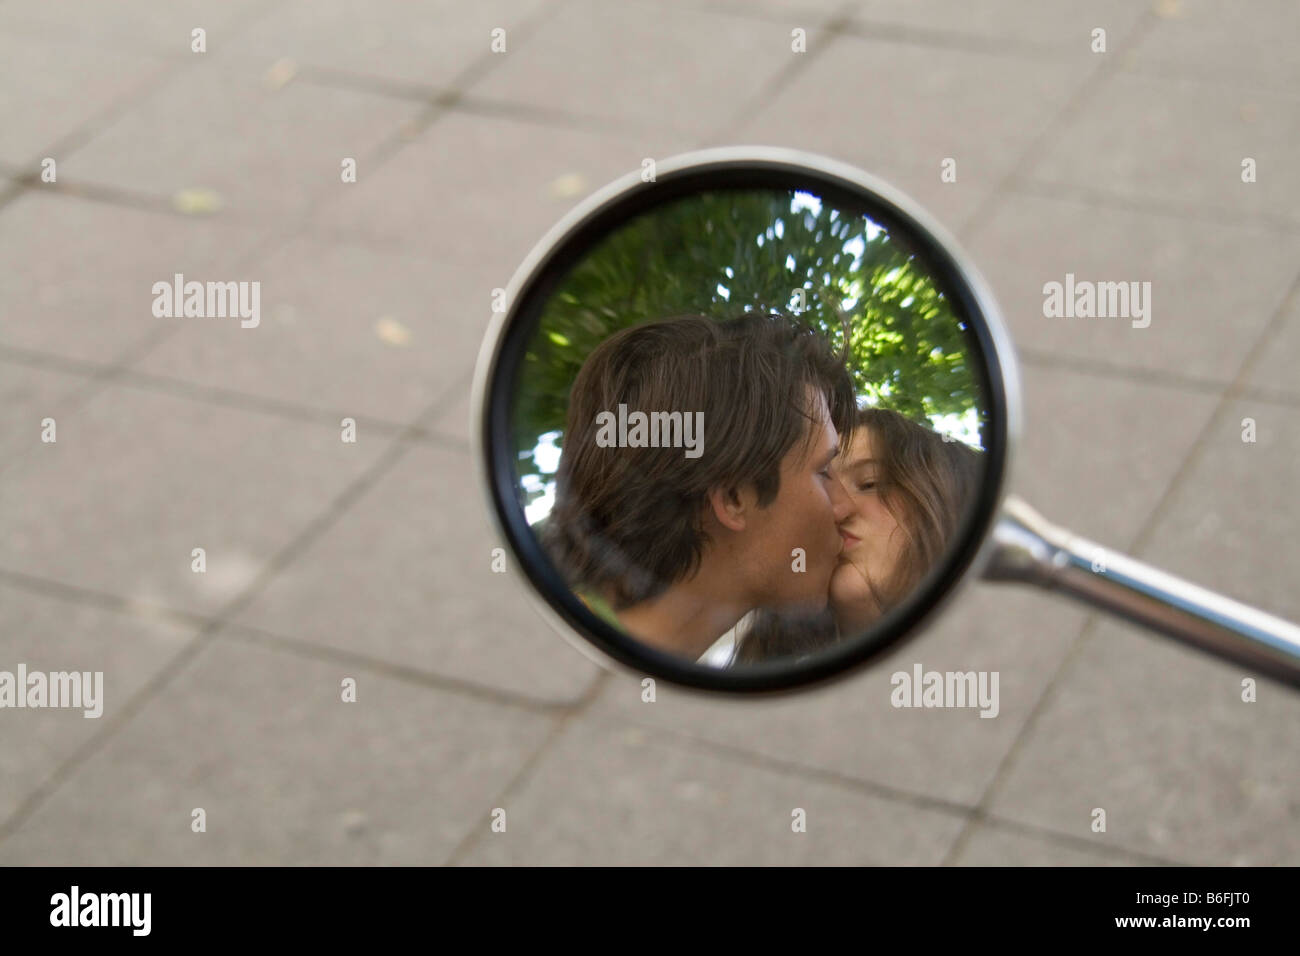 Kissing couple reflected in a mirror Stock Photo